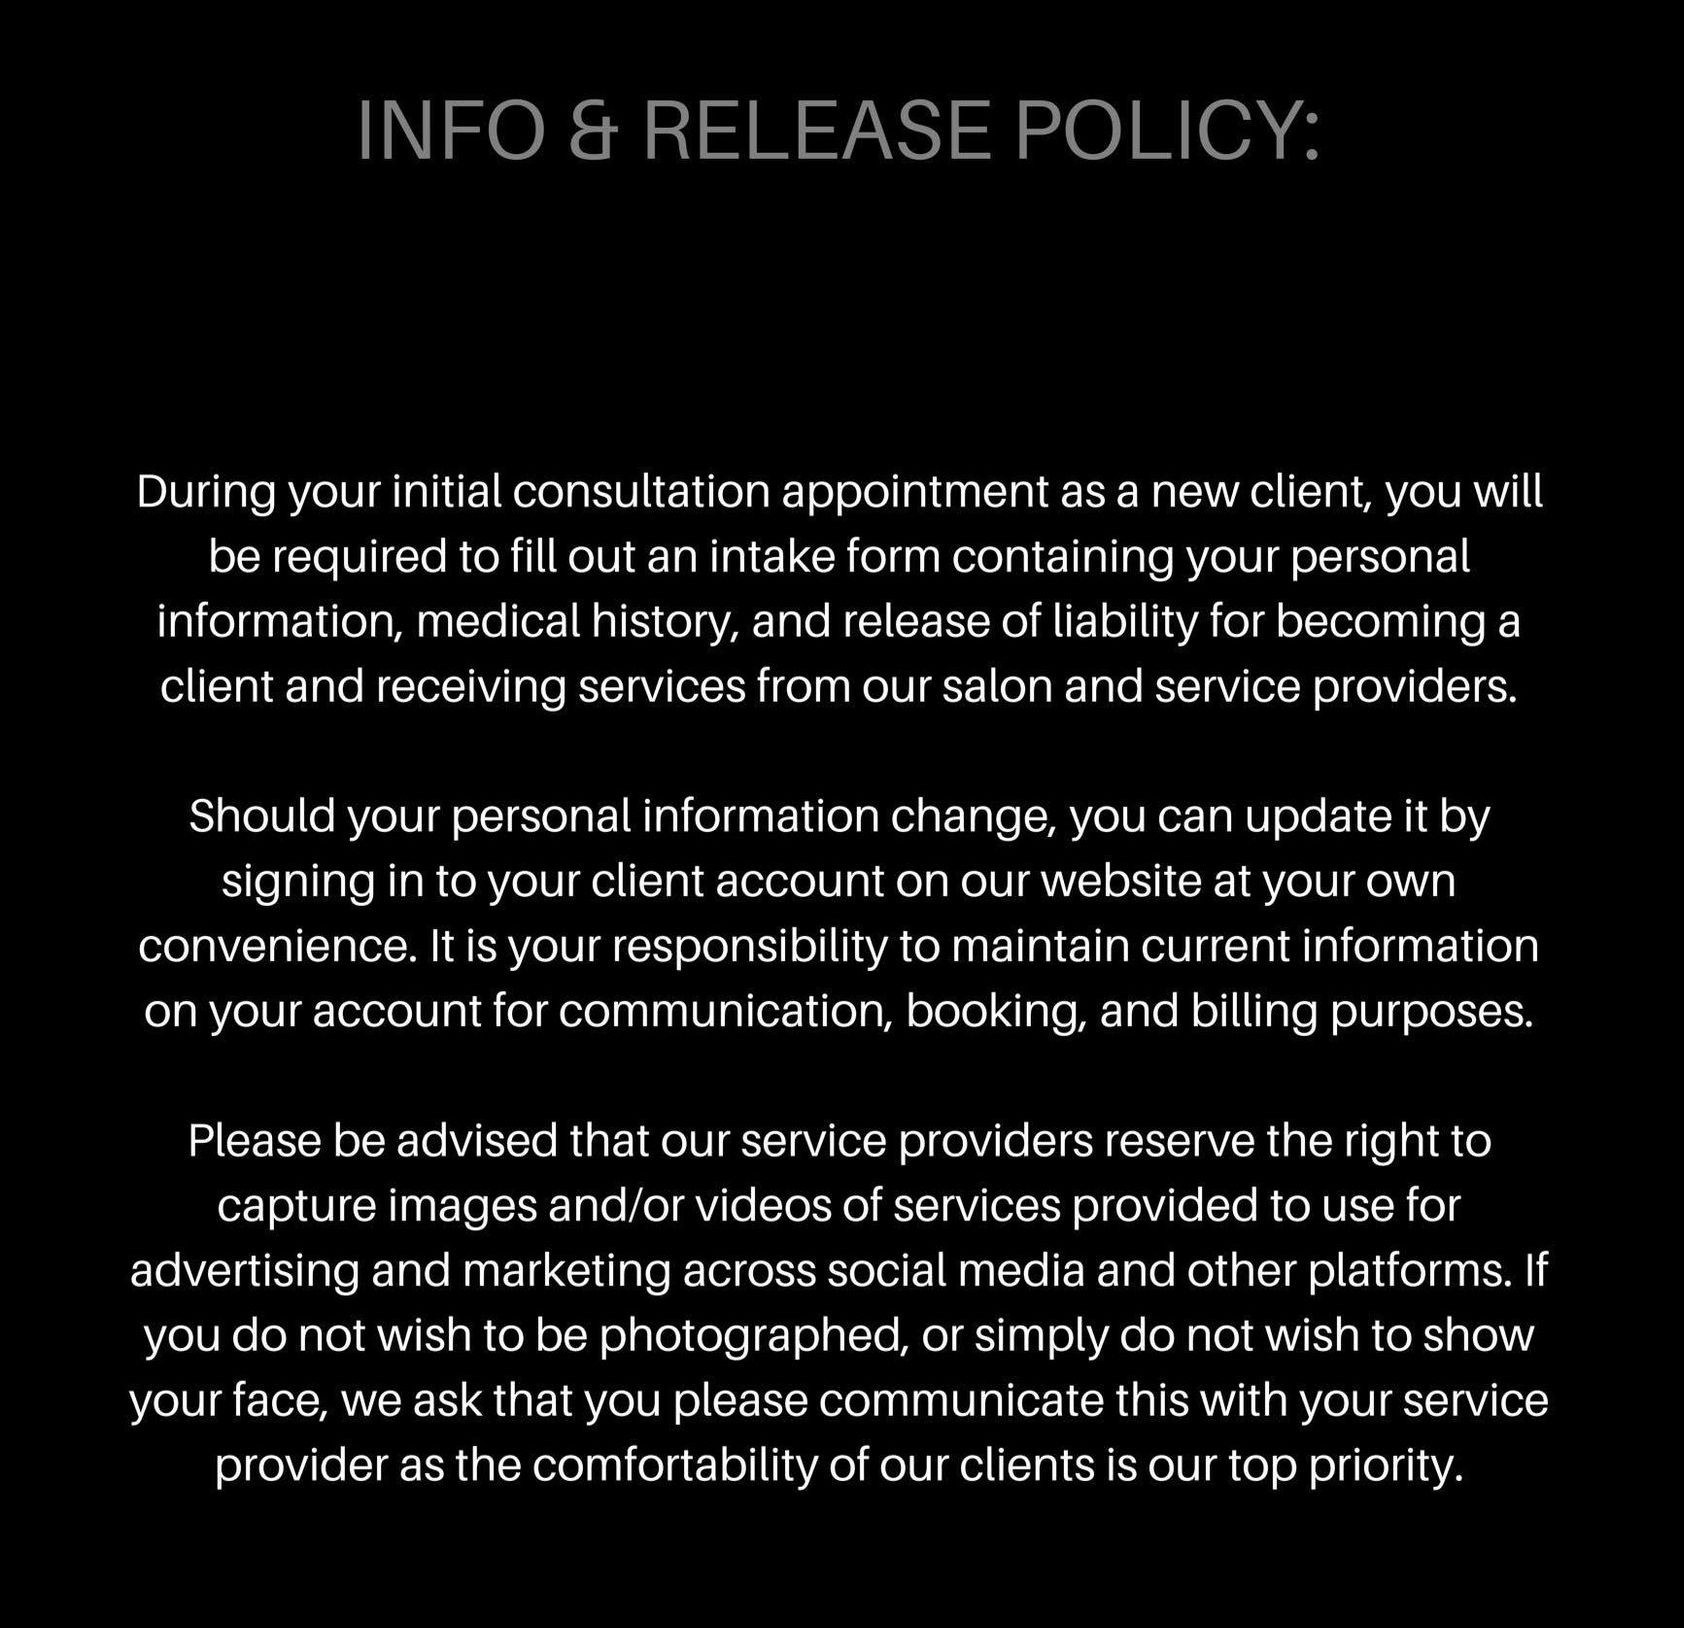 Info & Release Policy